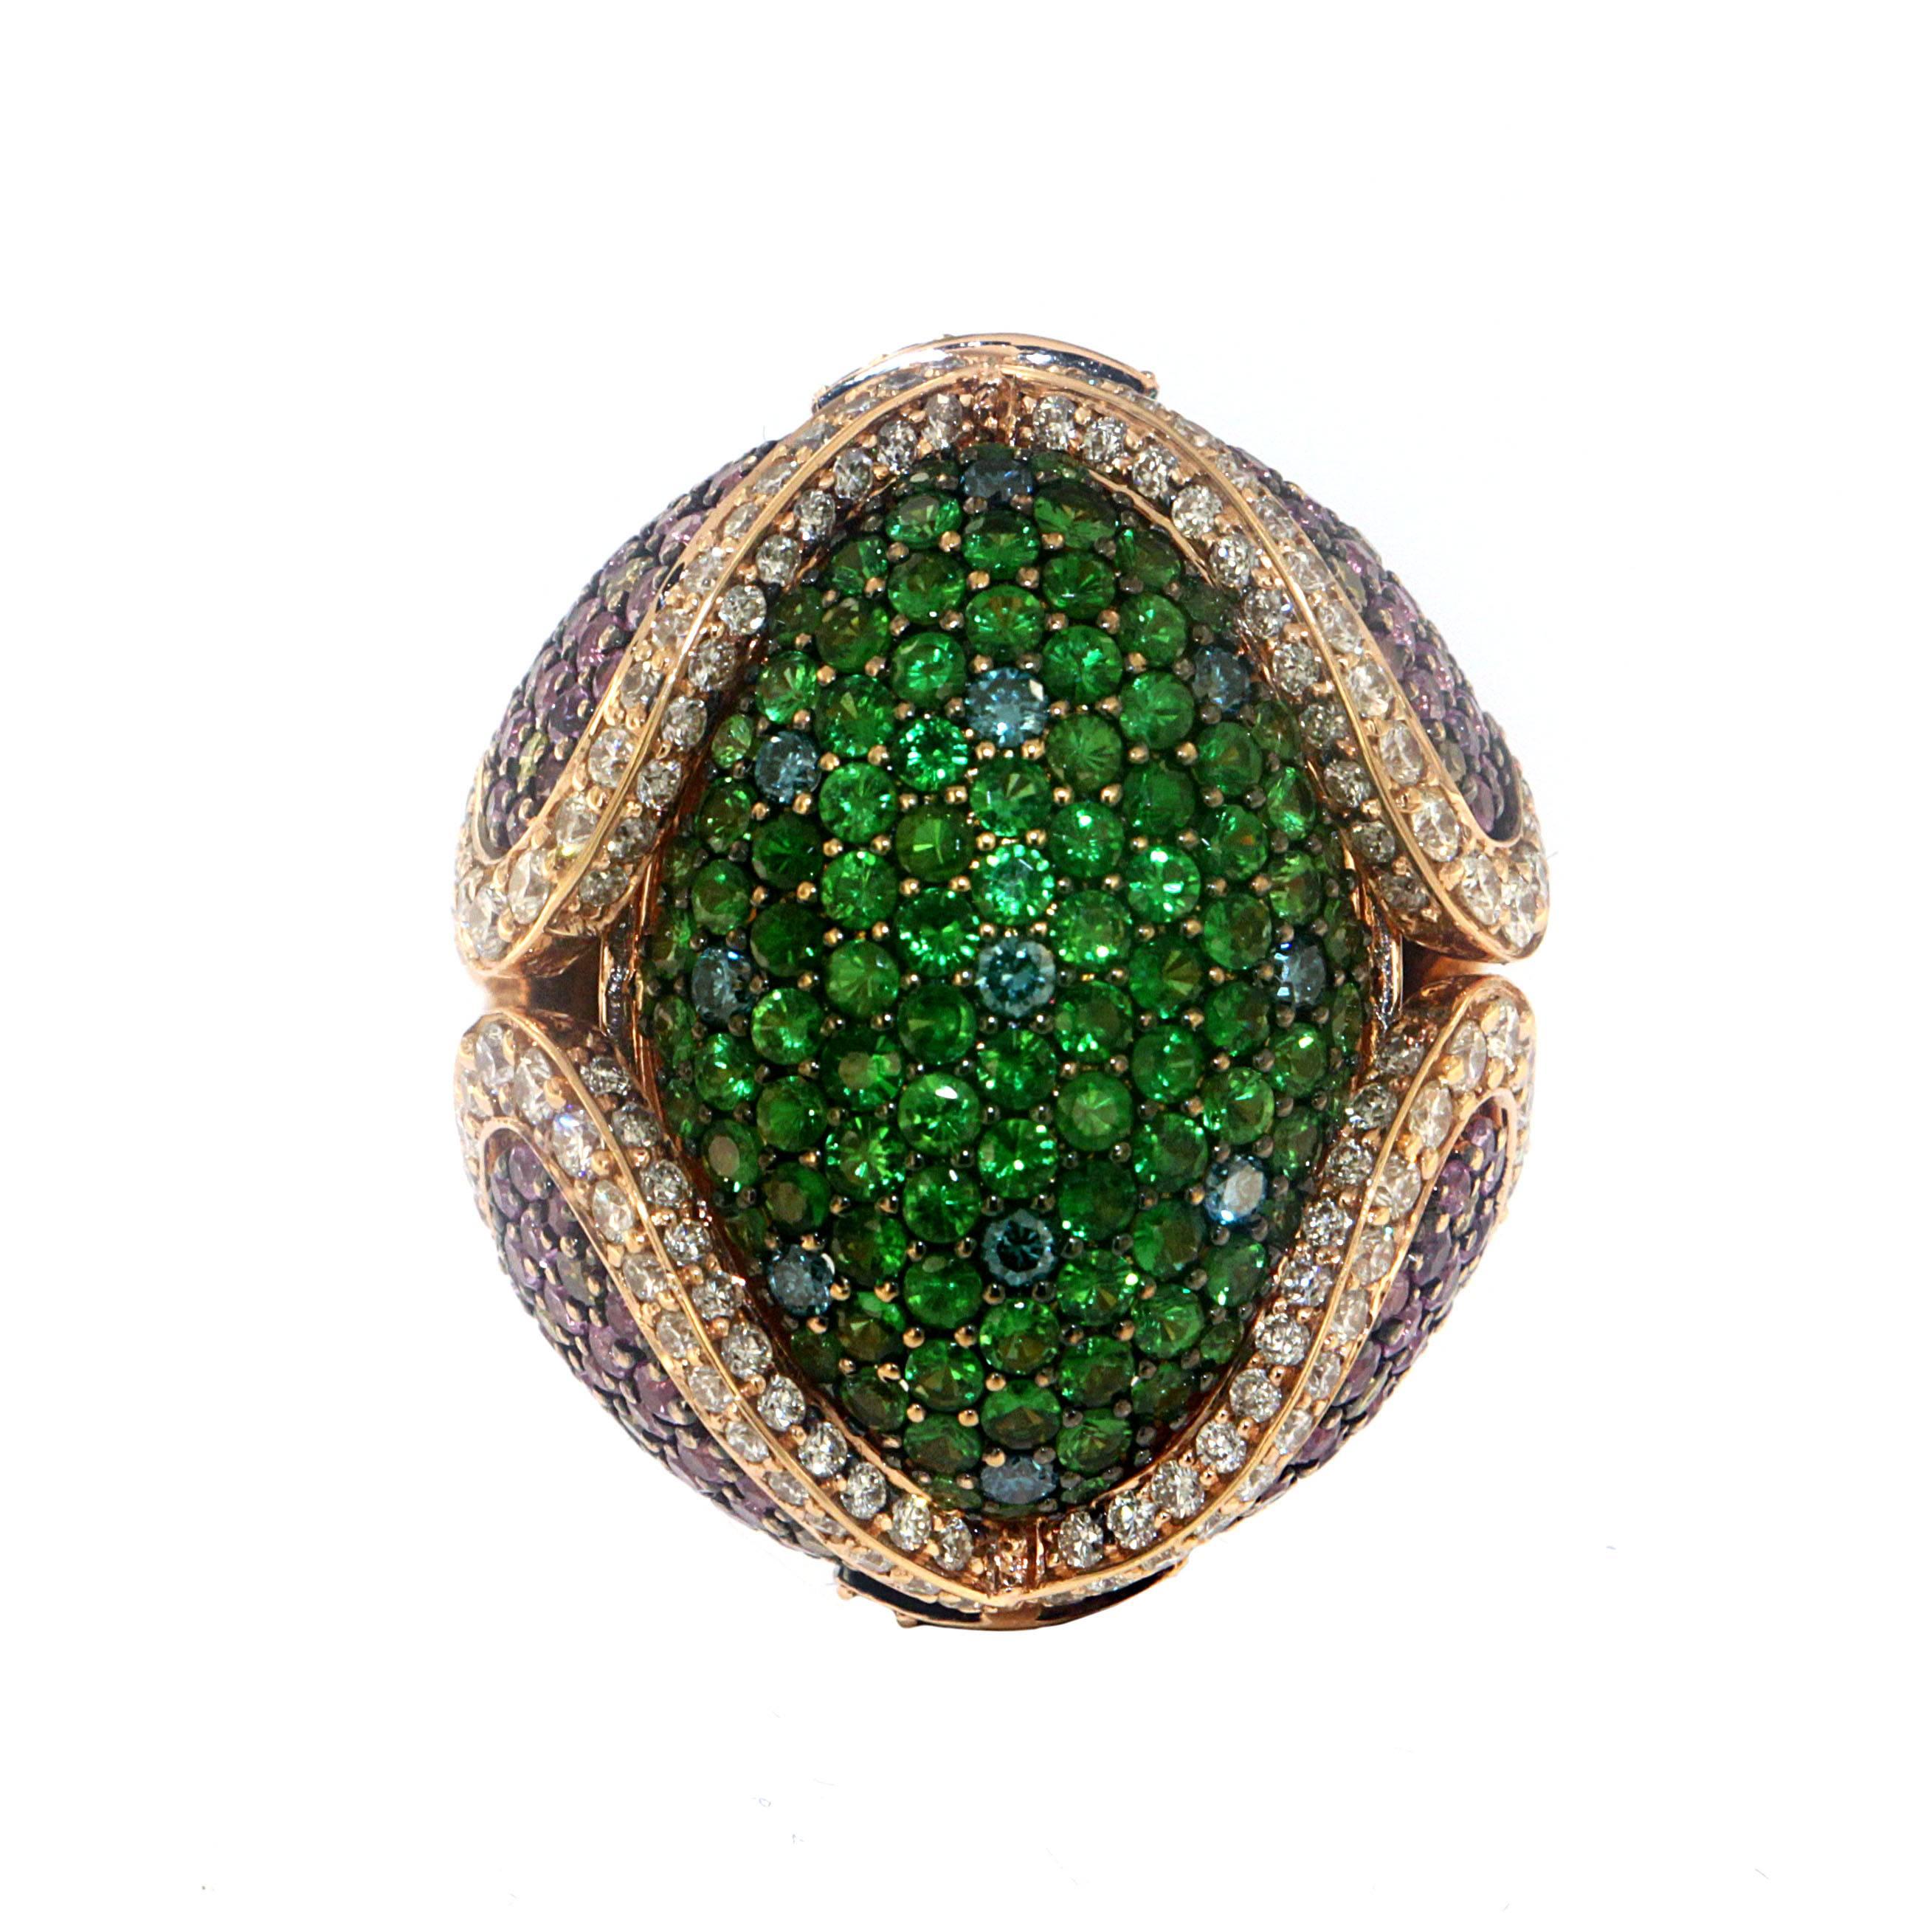 This bombe cocktail ring is a triumph of colorful precious gemstones featuring 2.92 Carats of Tsavorite Garnet at the dome with 3.69 Carats of Pink Sapphires, 1.60 Carats of White Diamonds, and 0.33 Carats of treated Blue Diamonds set on a pave-set